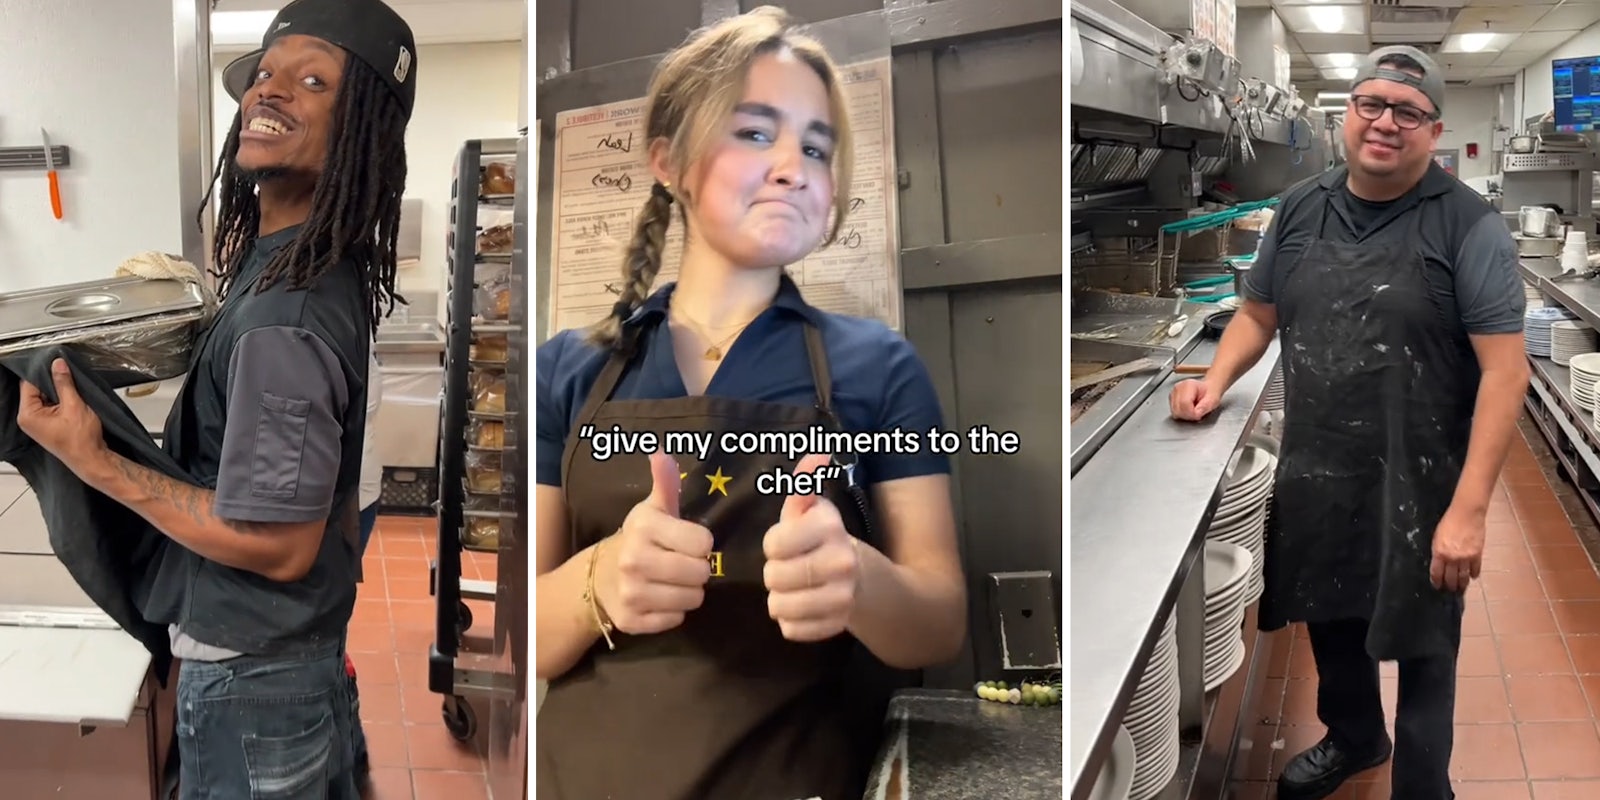 Server shows what happens when you give ‘your compliments to the ‘chef’